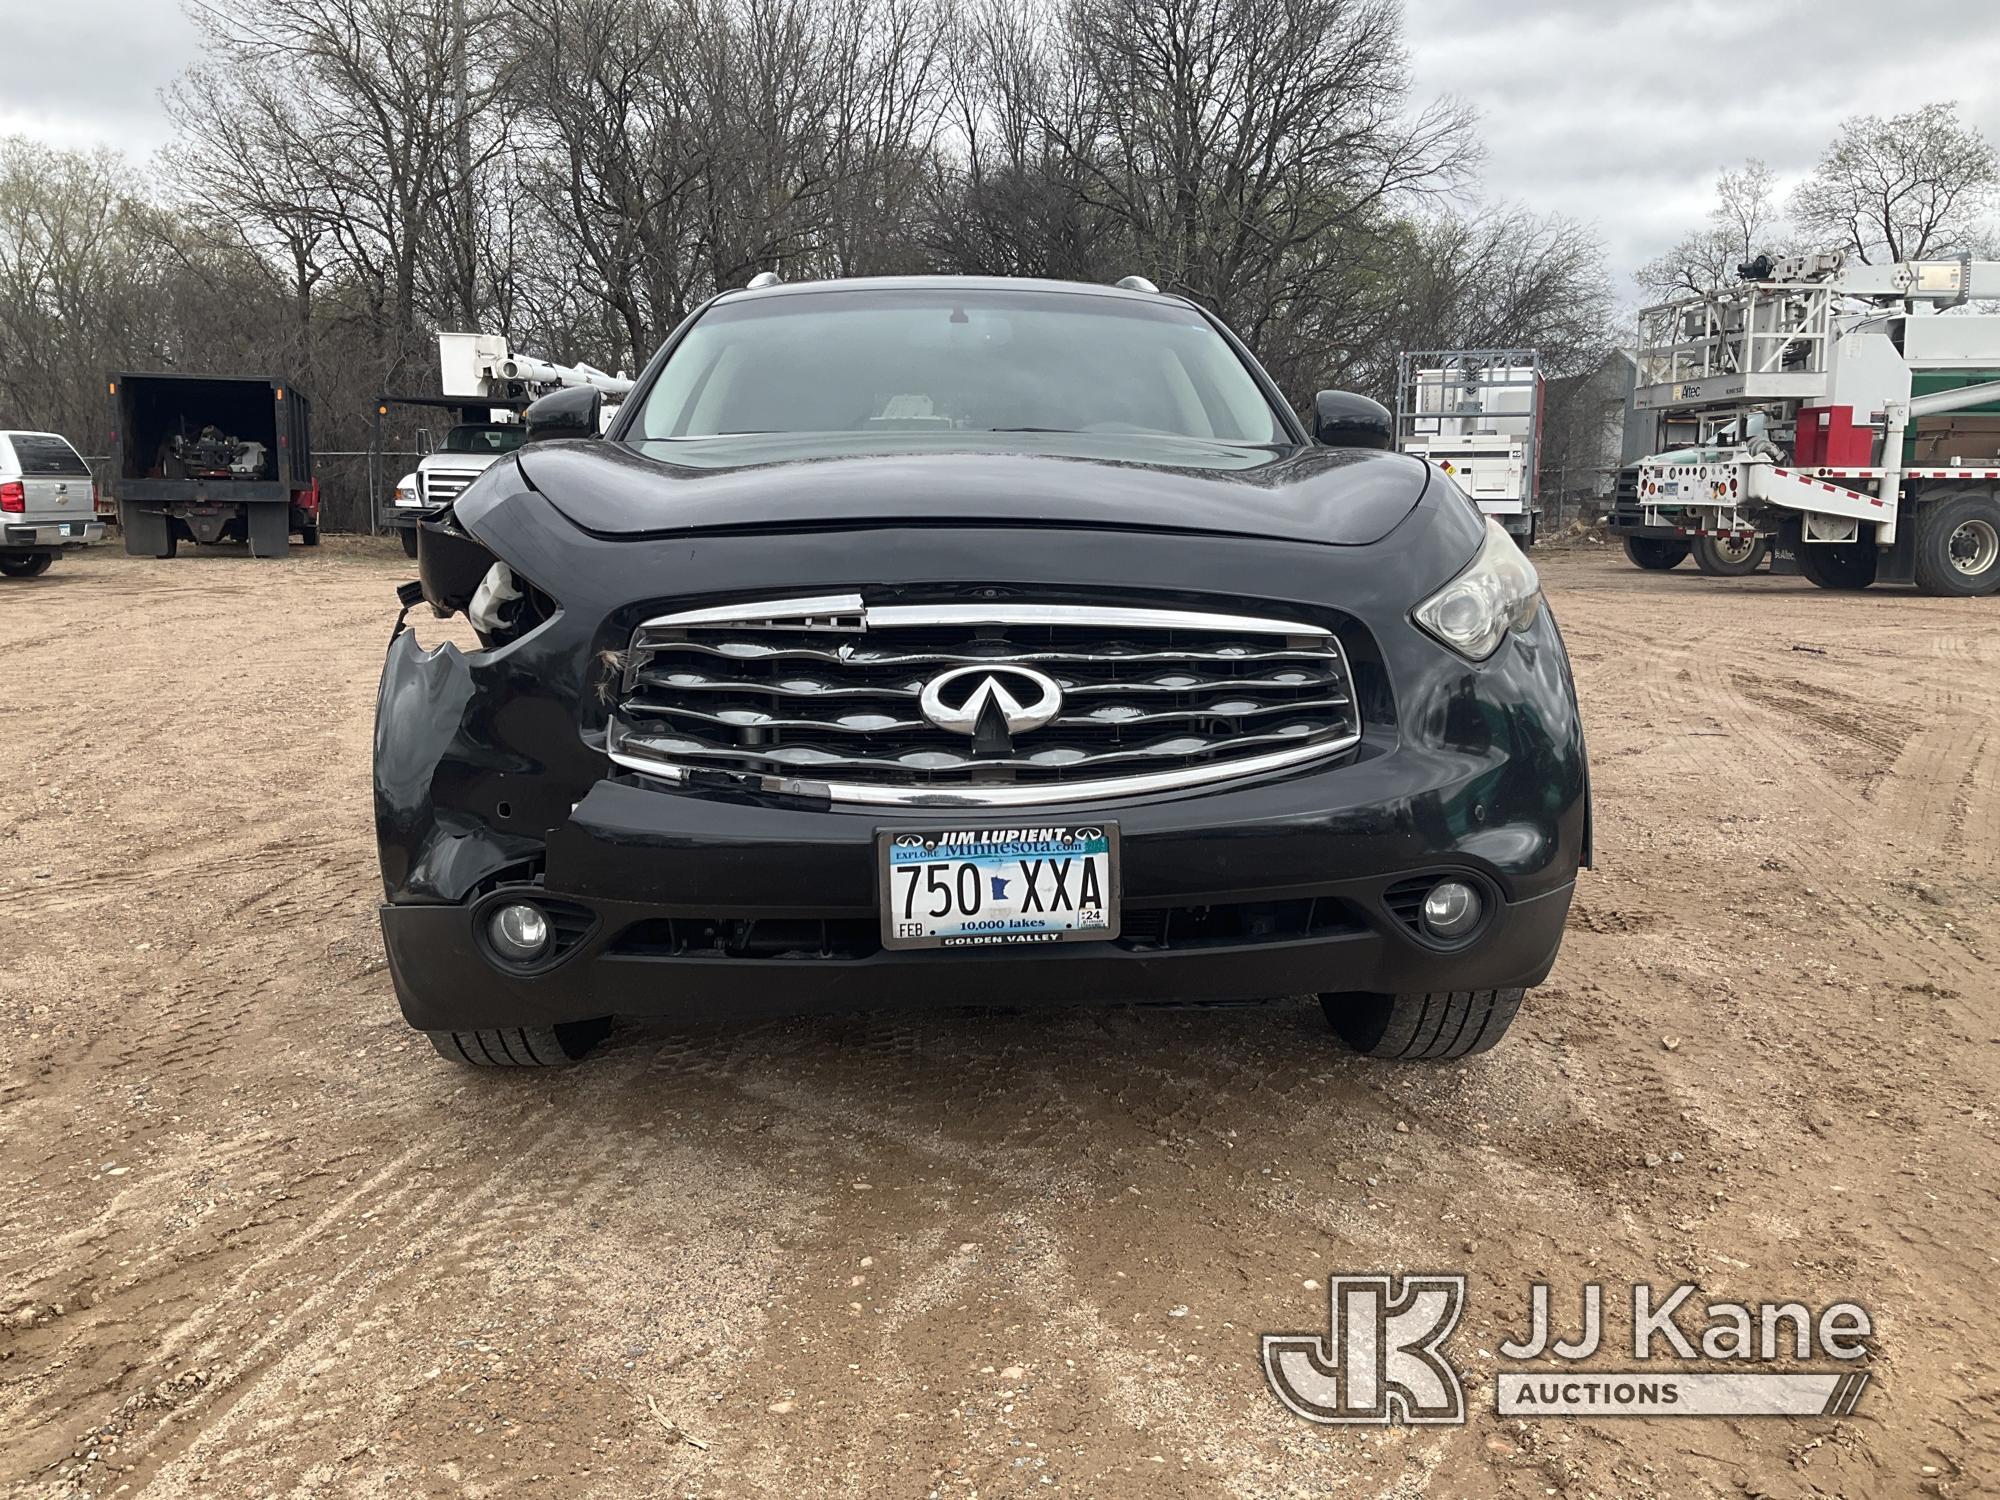 (Shakopee, MN) 2011 Infinity FX35 Sport Utility Vehicle Starts, Runs, Moves, Front end damage, body